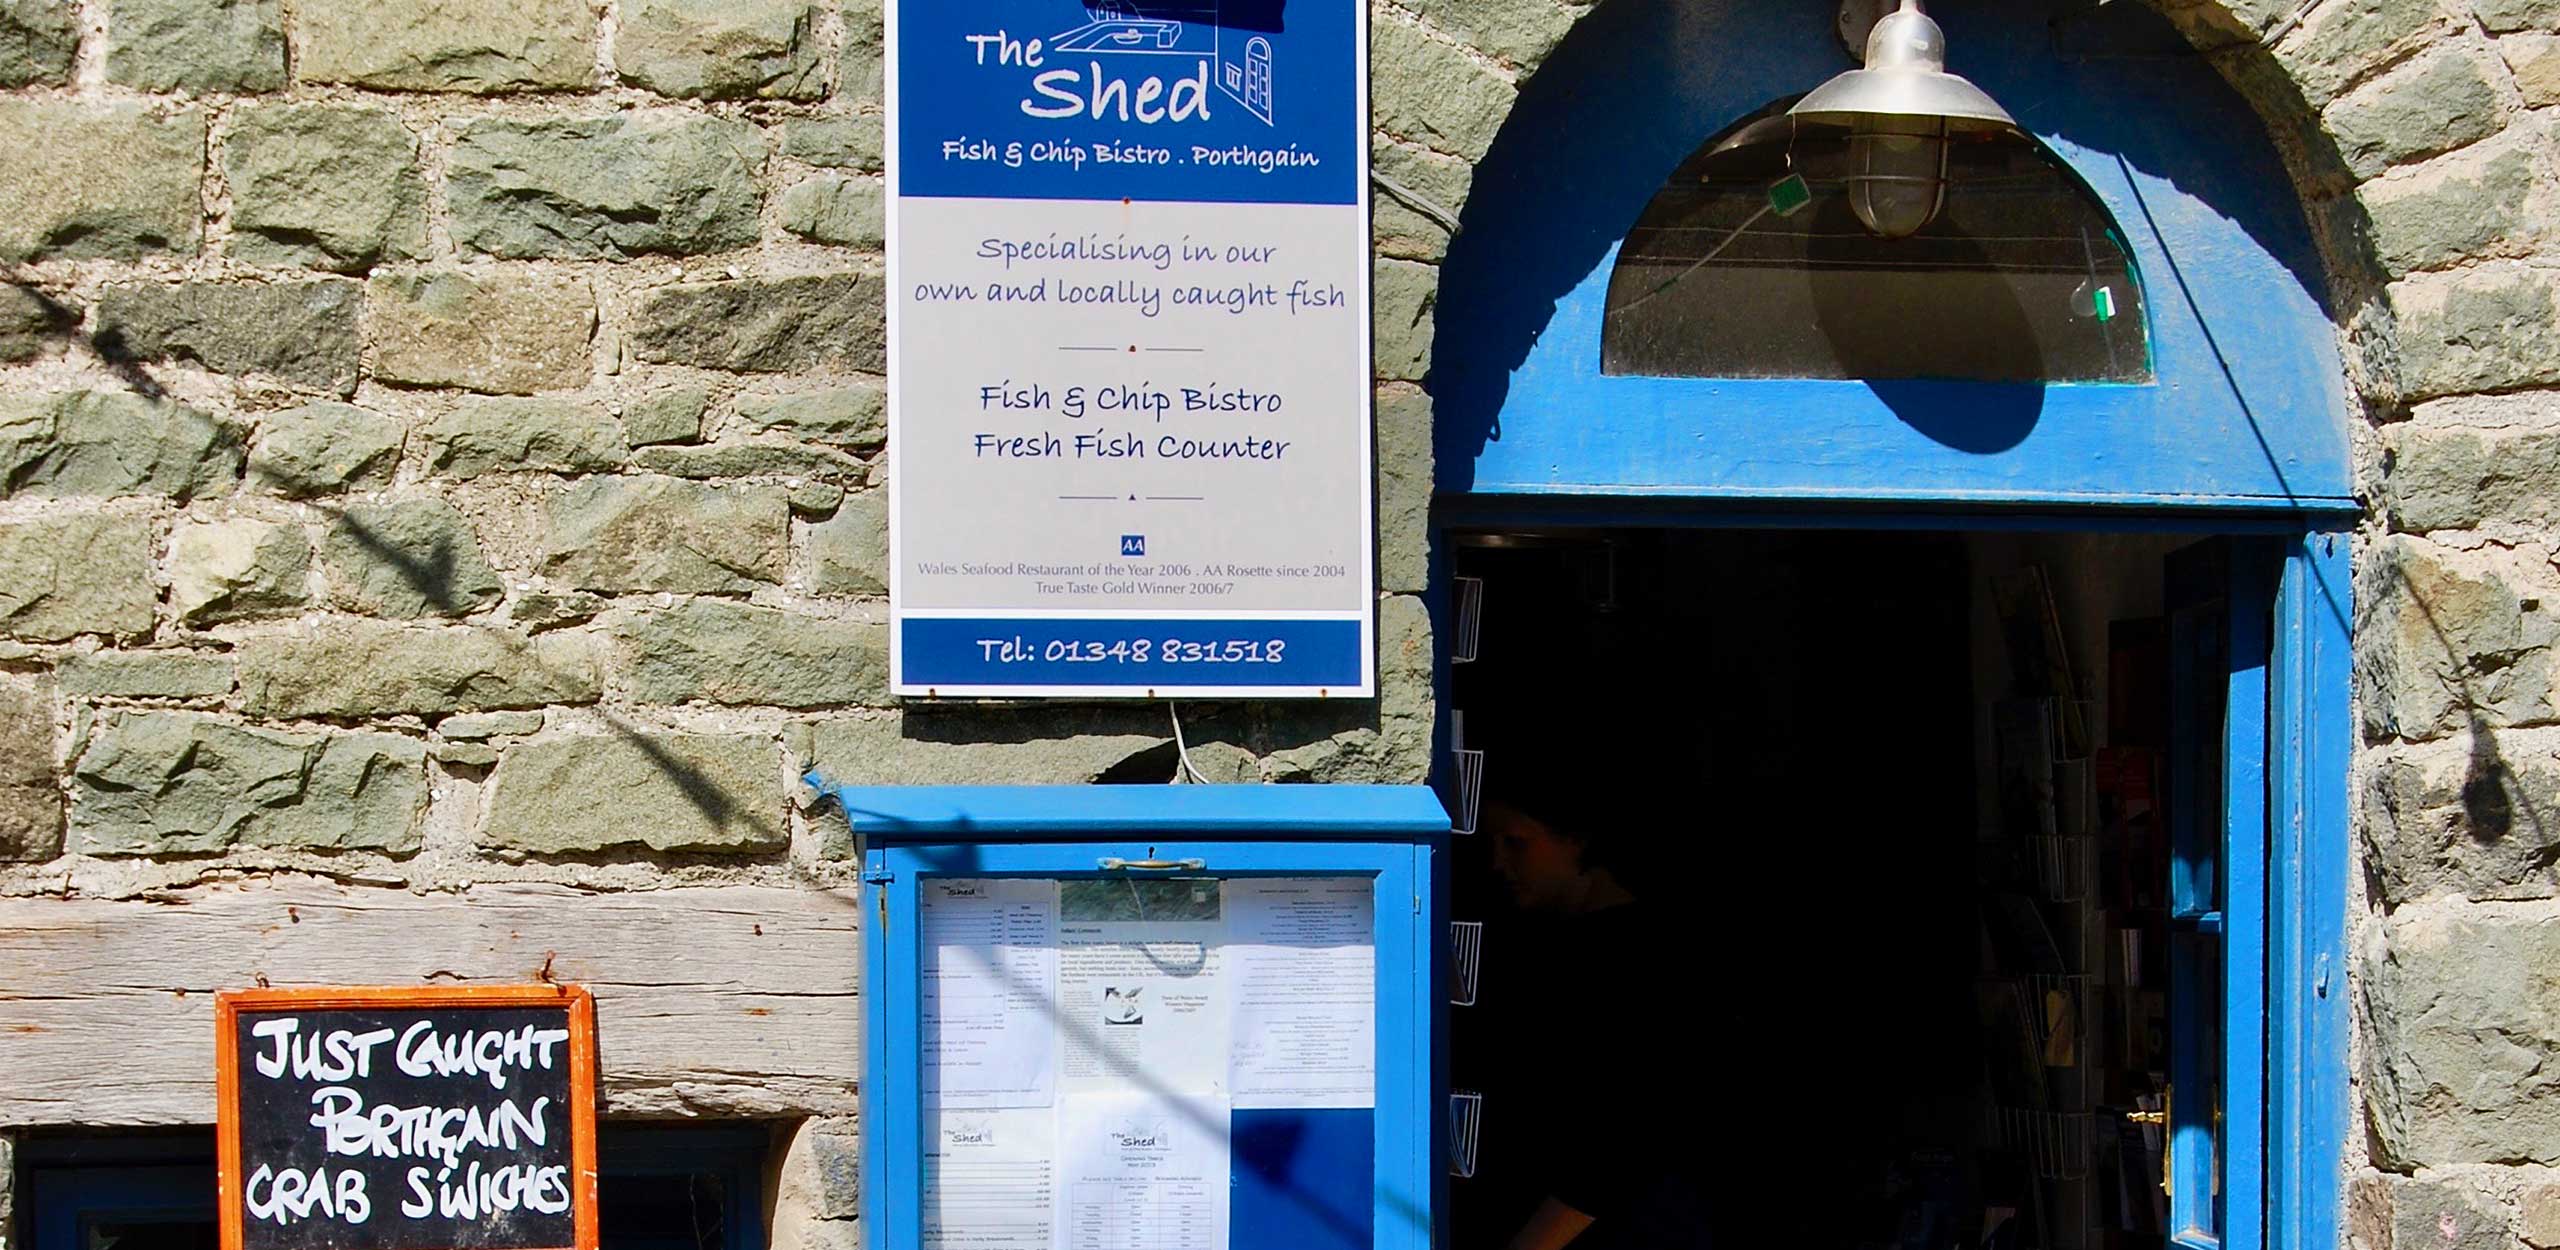 The Shed at Porthgain